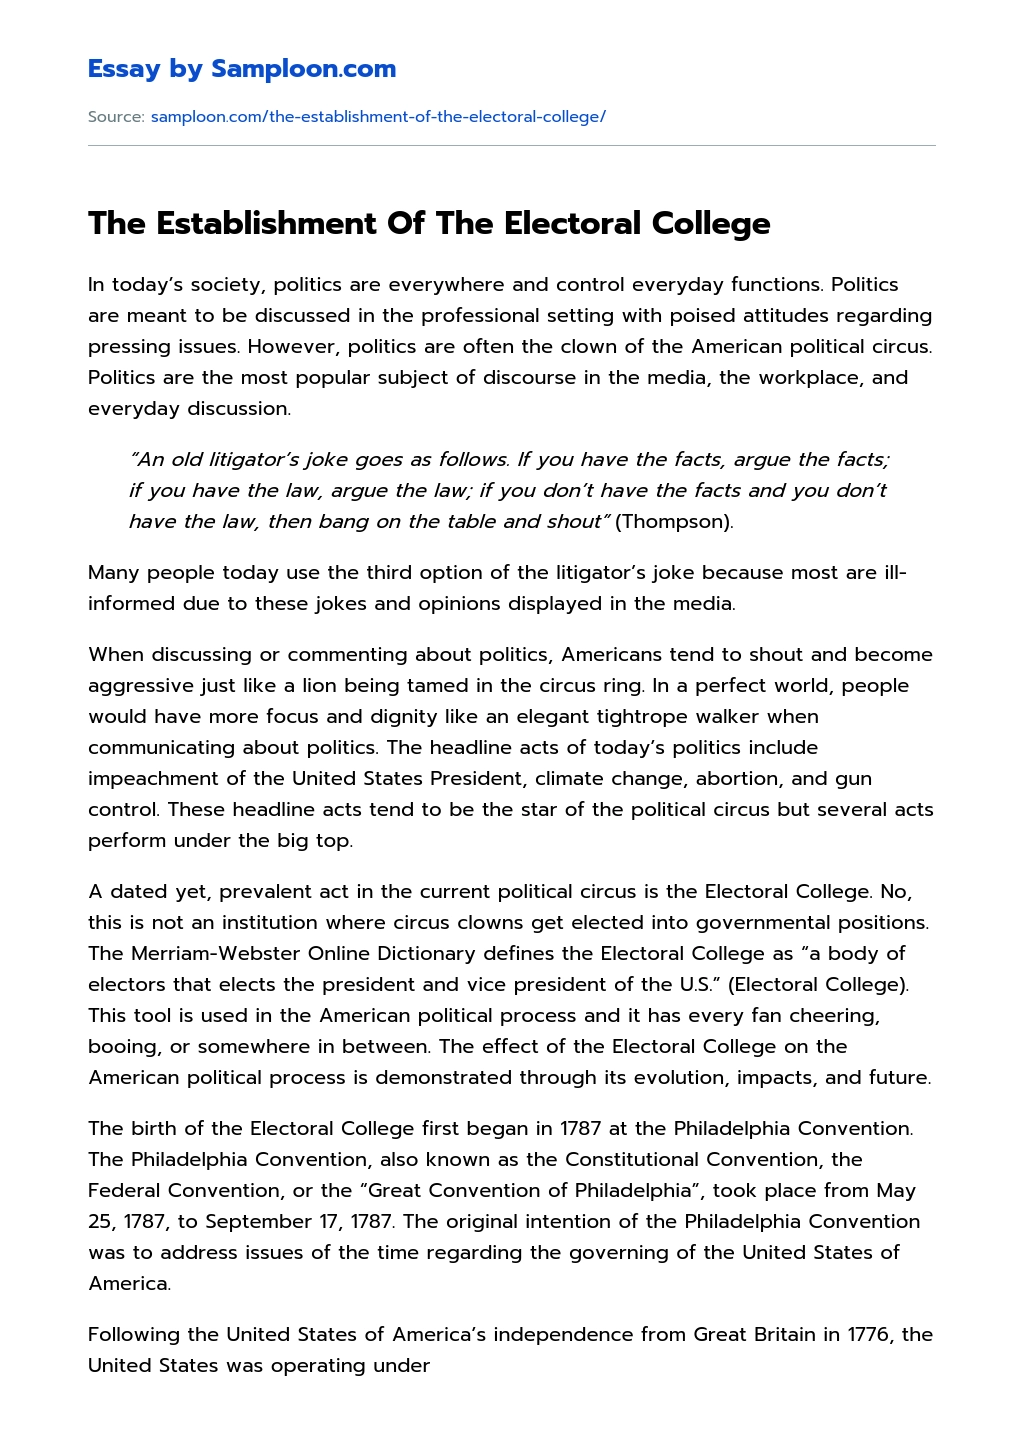 keeping the electoral college essay